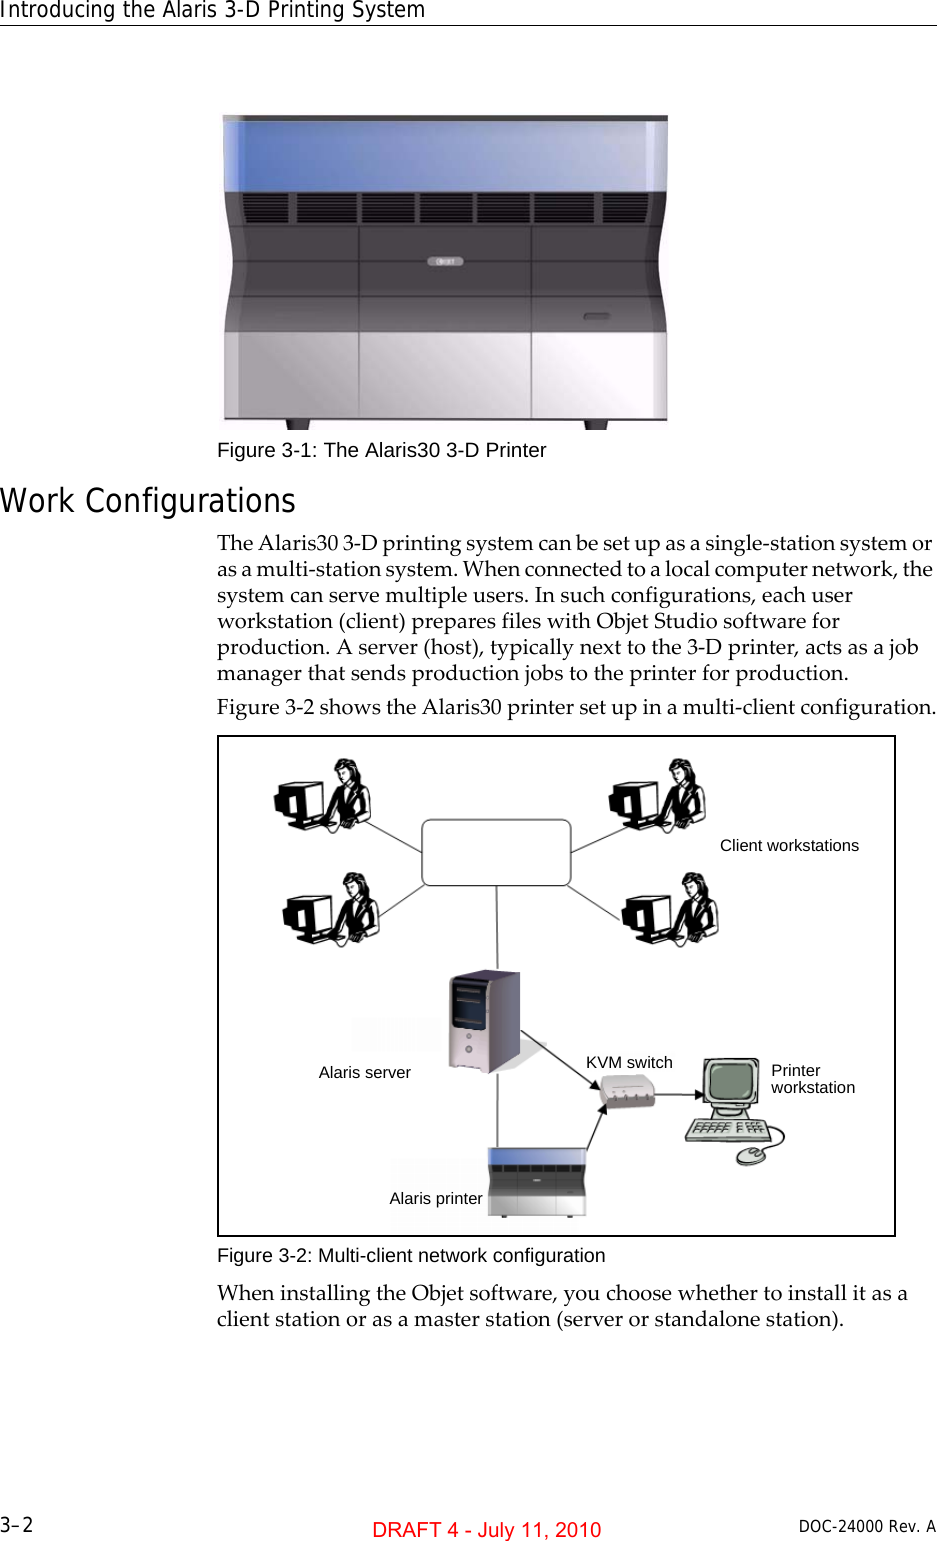 Introducing the Alaris 3-D Printing System3–2 DOC-24000 Rev. AFigure 3-1: The Alaris30 3-D PrinterWork ConfigurationsTheAlaris303‐Dprintingsystemcanbesetupasasingle‐stationsystemorasamulti‐stationsystem.Whenconnectedtoalocalcomputernetwork,thesystemcanservemultipleusers.Insuchconfigurations,eachuserworkstation(client)preparesfileswithObjetStudiosoftwareforproduction.Aserver(host),typicallynexttothe3‐Dprinter,actsasajobmanagerthatsendsproductionjobstotheprinterforproduction.Figure 3‐2showstheAlaris30printersetupinamulti‐clientconfiguration.Figure 3-2: Multi-client network configurationWheninstallingtheObjetsoftware,youchoosewhethertoinstallitasaclientstationorasamasterstation(serverorstandalonestation).Alaris server KVM switchClient workstationsPrinter workstationAlaris printerDRAFT 4 - July 11, 2010